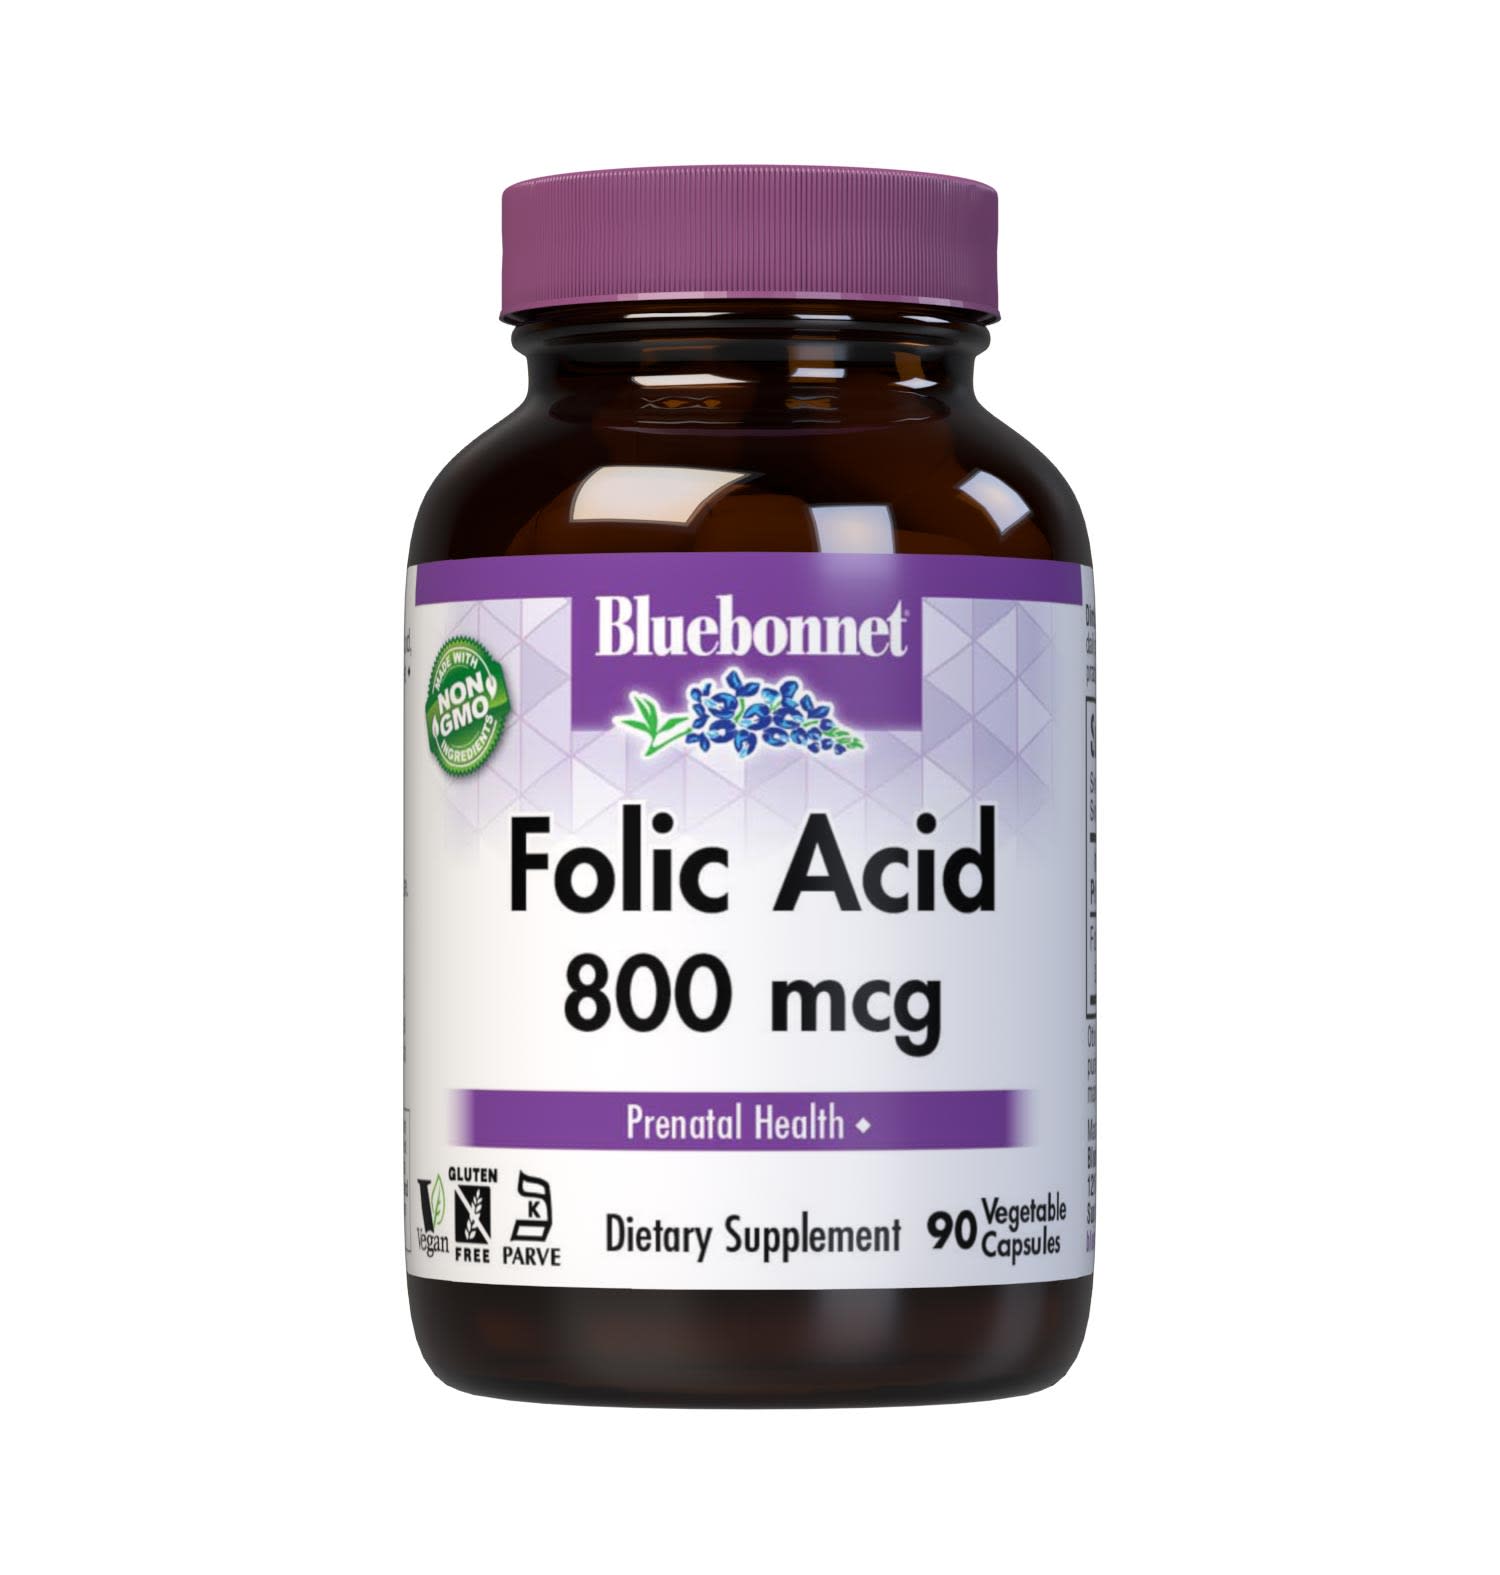 Bluebonnet’s Folic Acid 800 mcg Vegetable Capsules are formulated with folate in its crystalline form which may help support neural tube development. #size_90 count